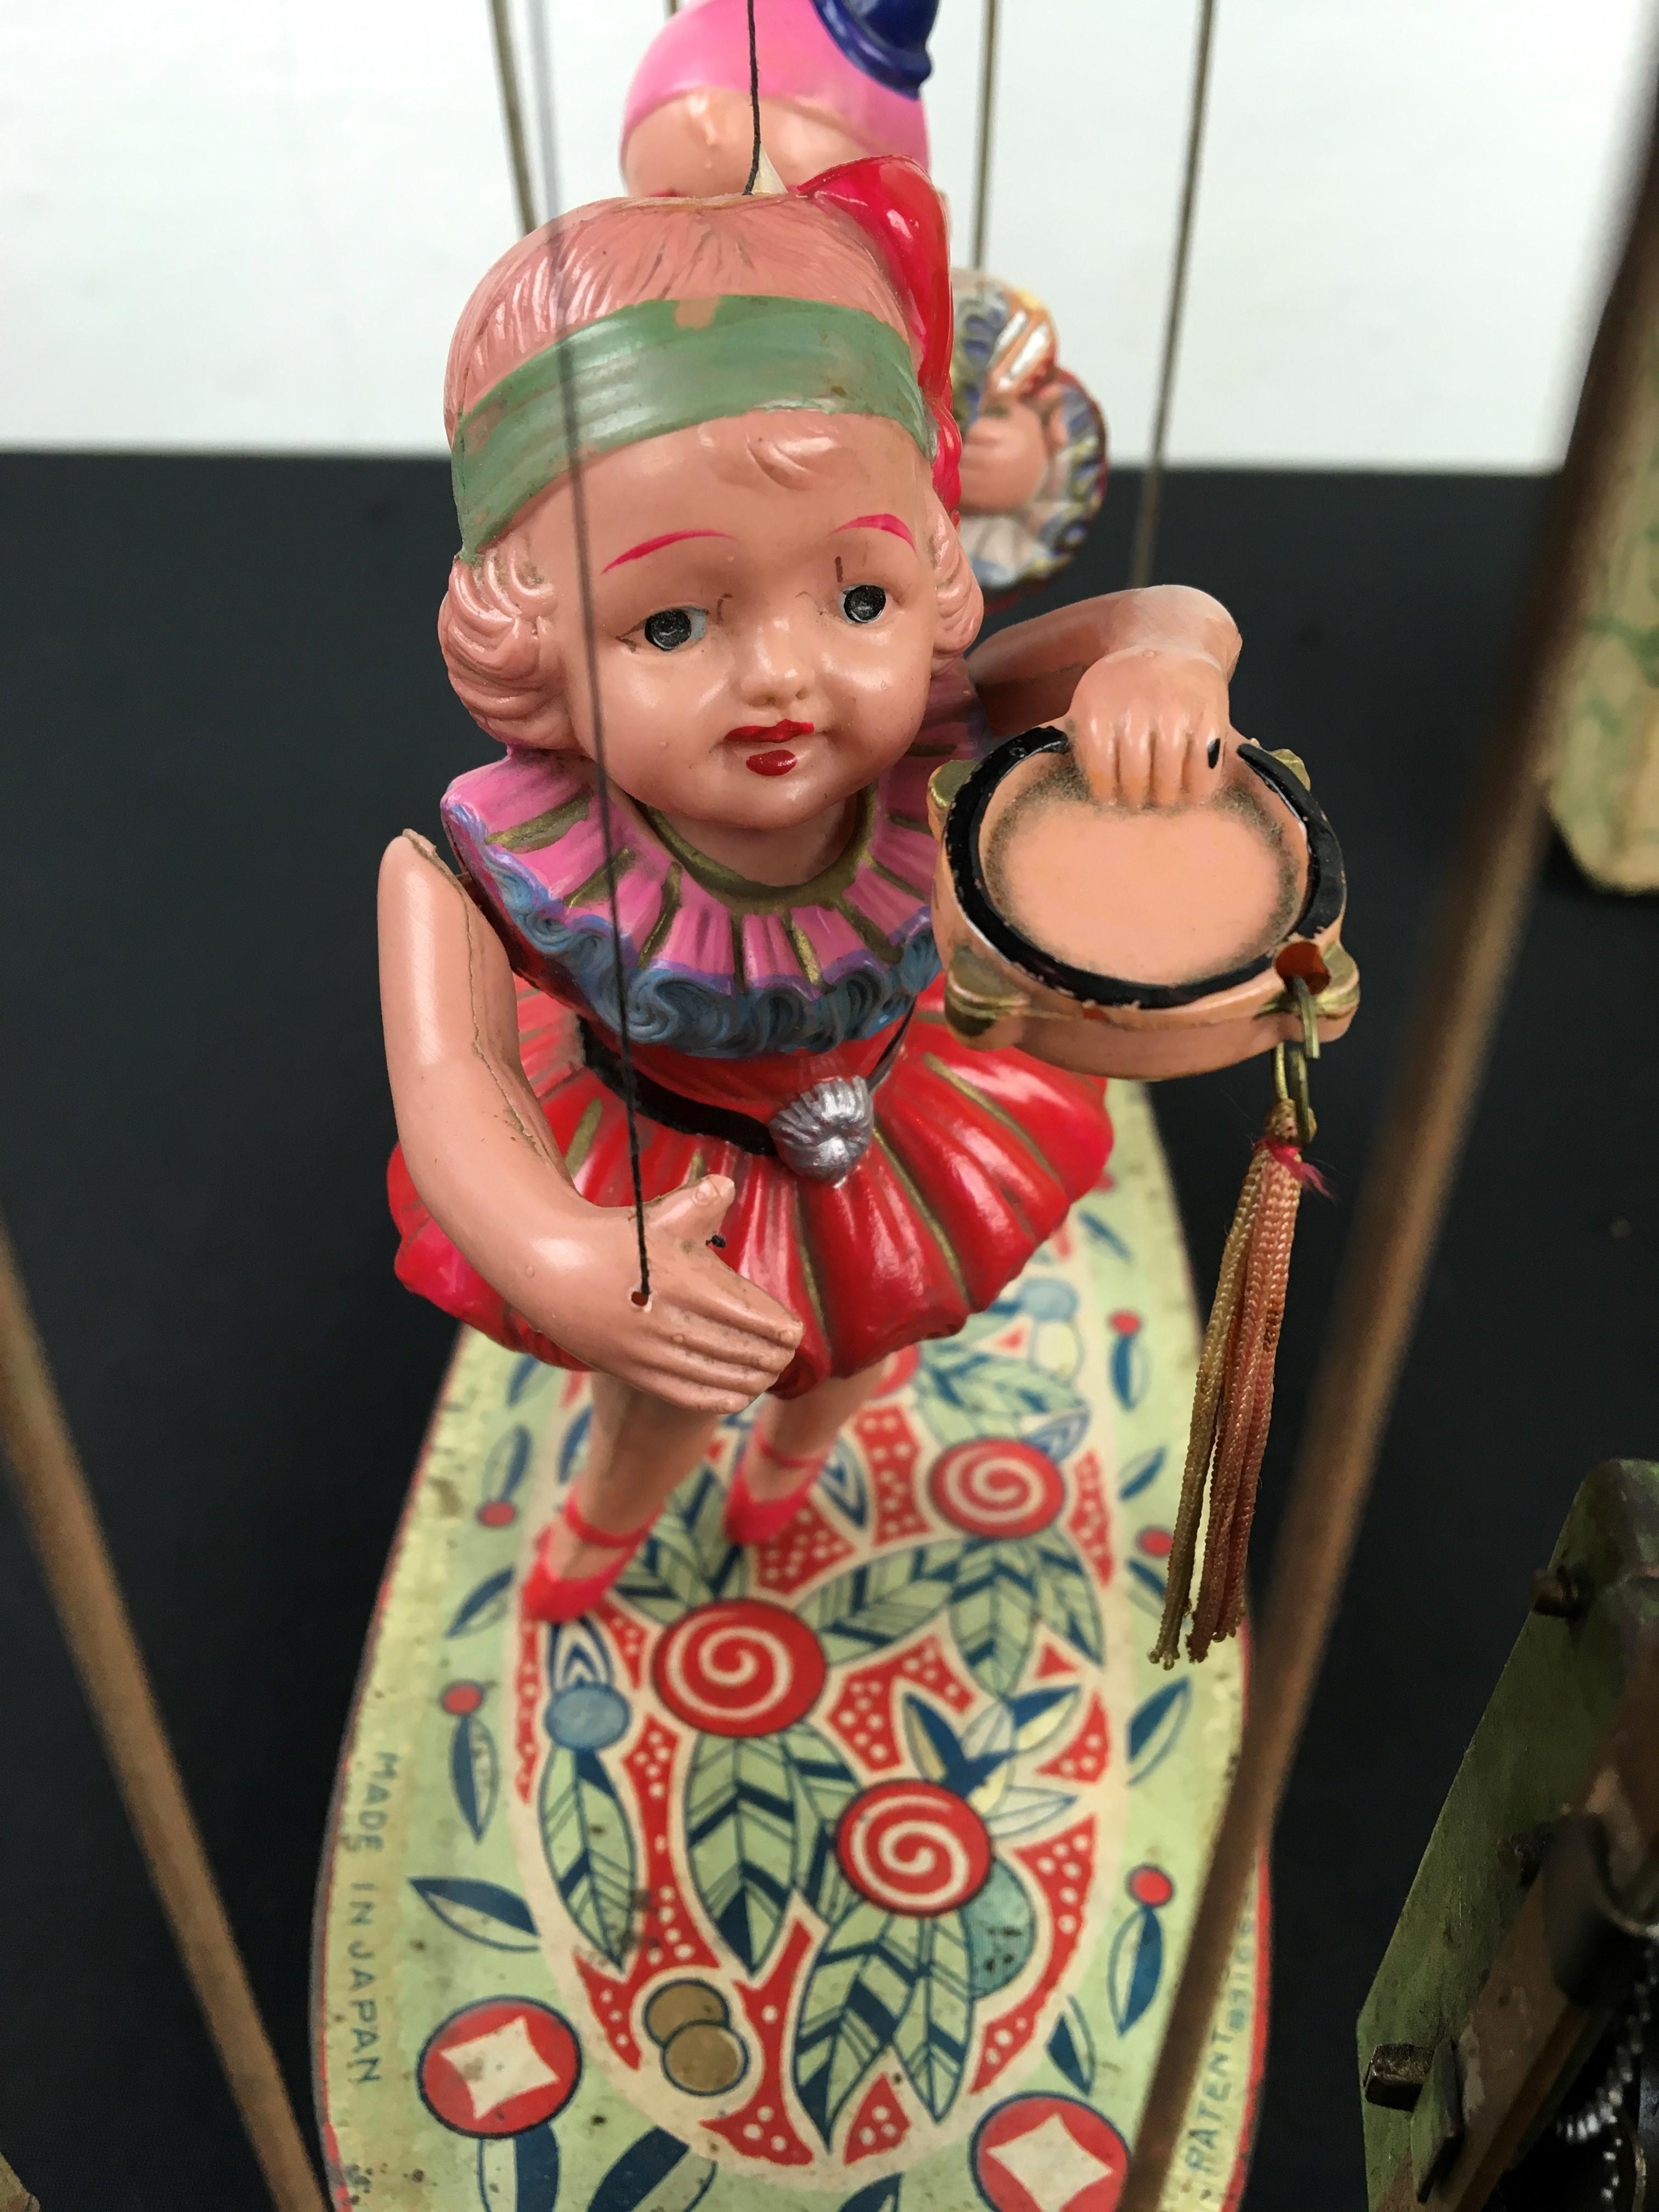 Metal Boxed Marionette Theatre Toy, Early 20th Century